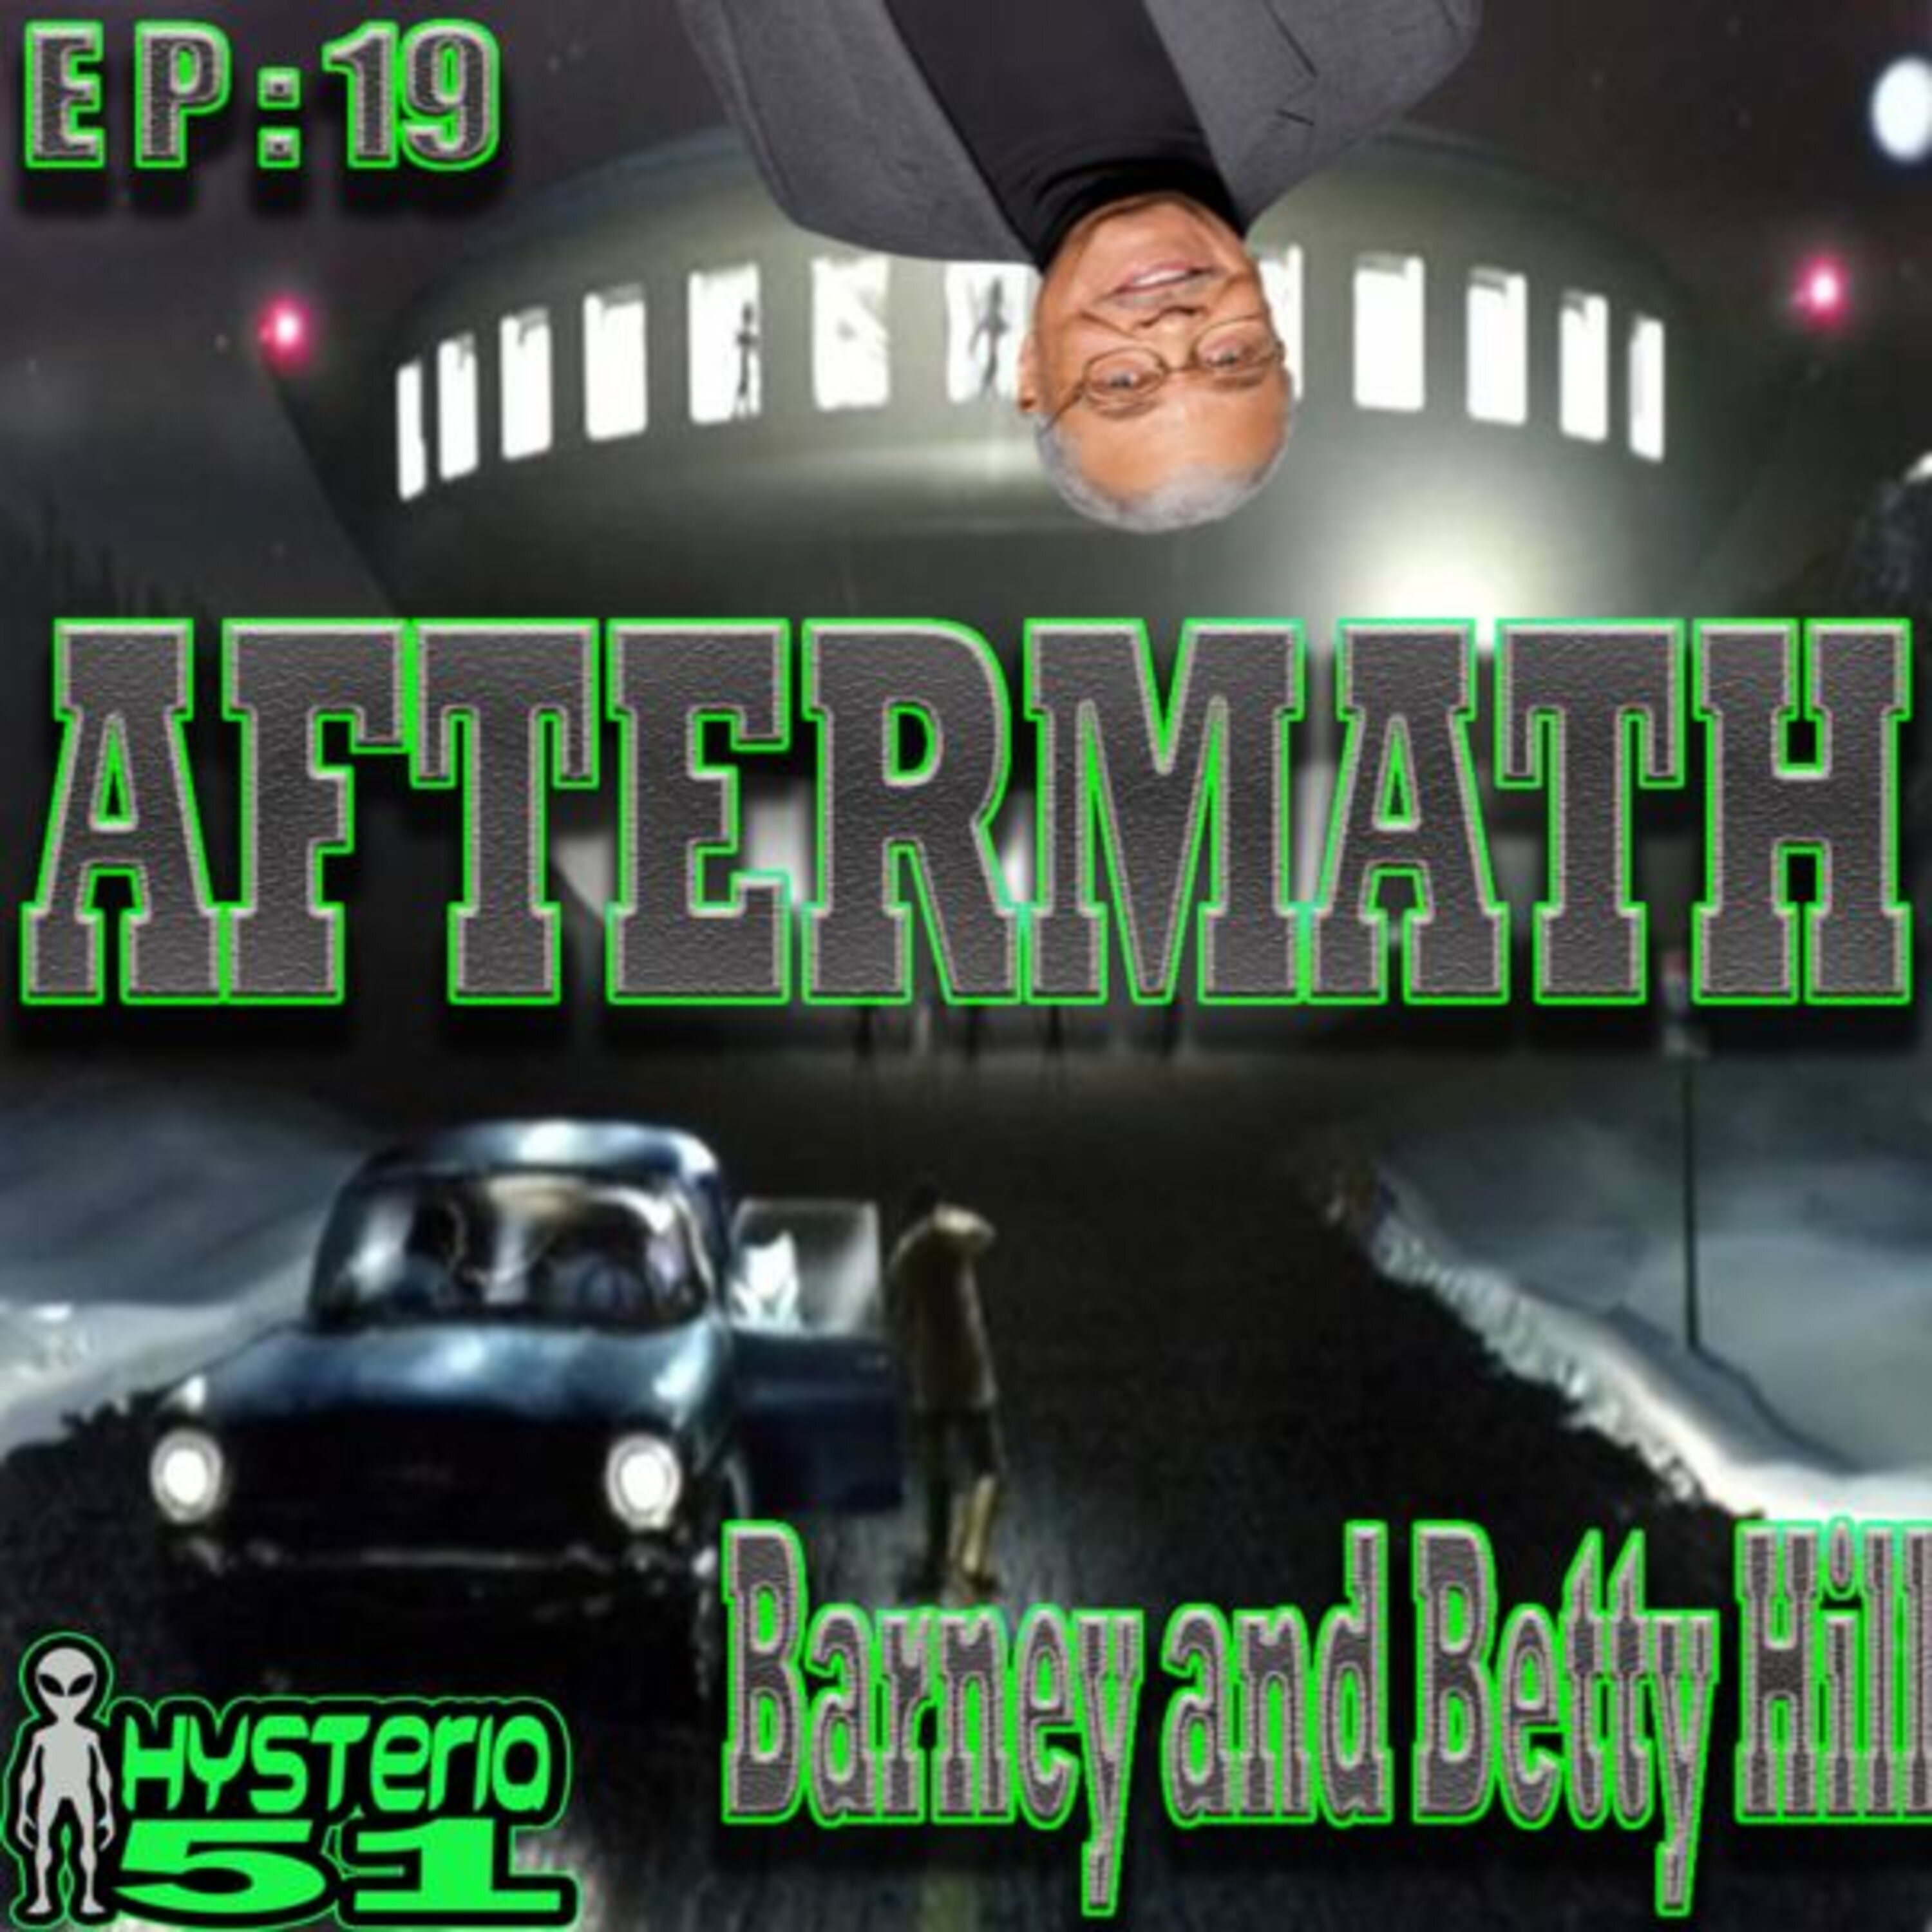 Aftermath - Barney and Betty Hill | 19